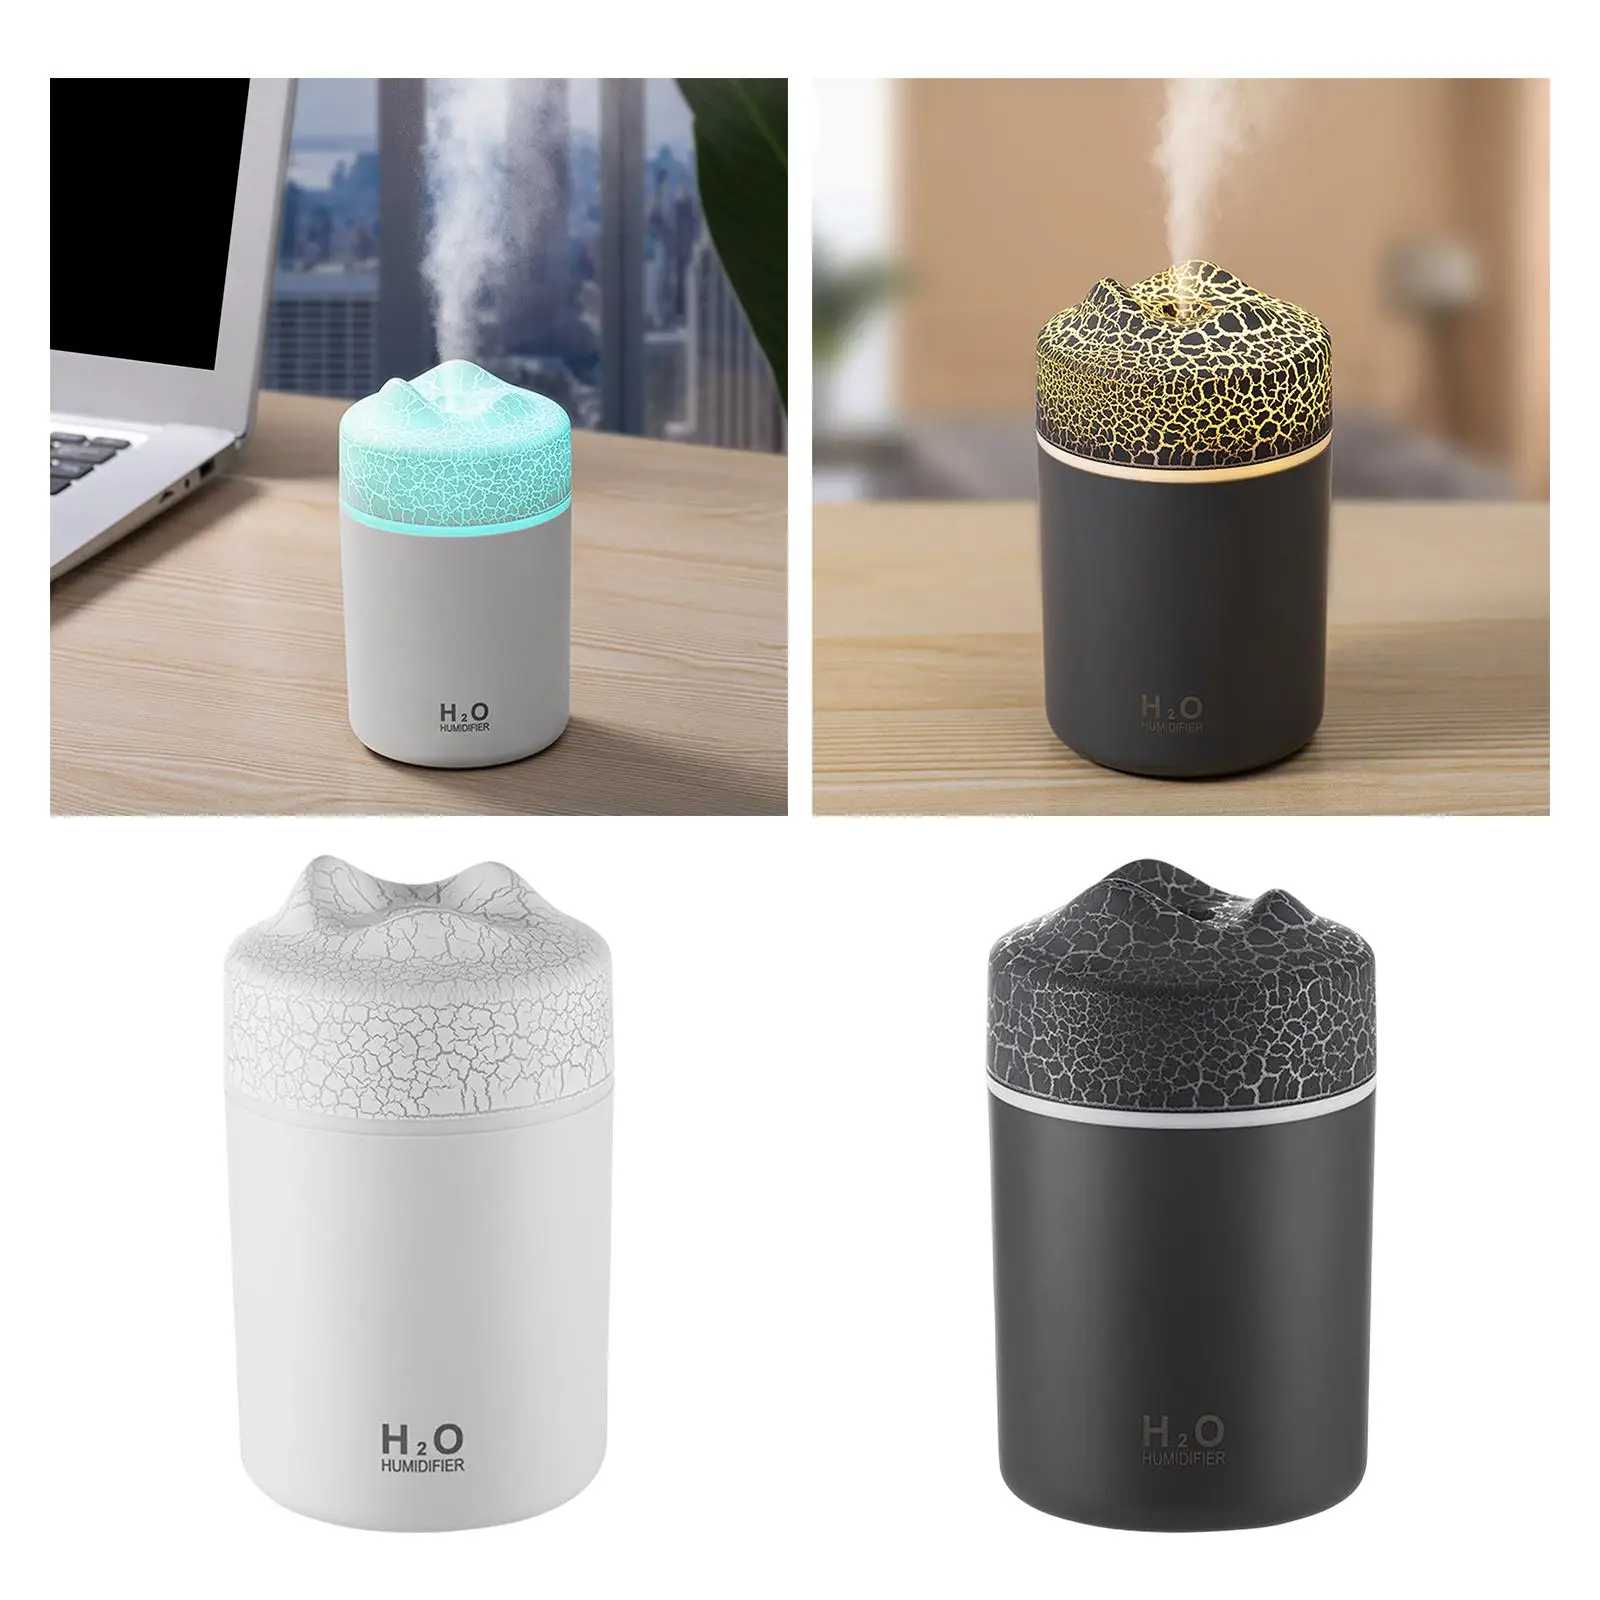 Cool Mini Humidifiers Small Night Light Air Humidifier Desktop Humidifier for Office Baby Bedroom Home NightStand